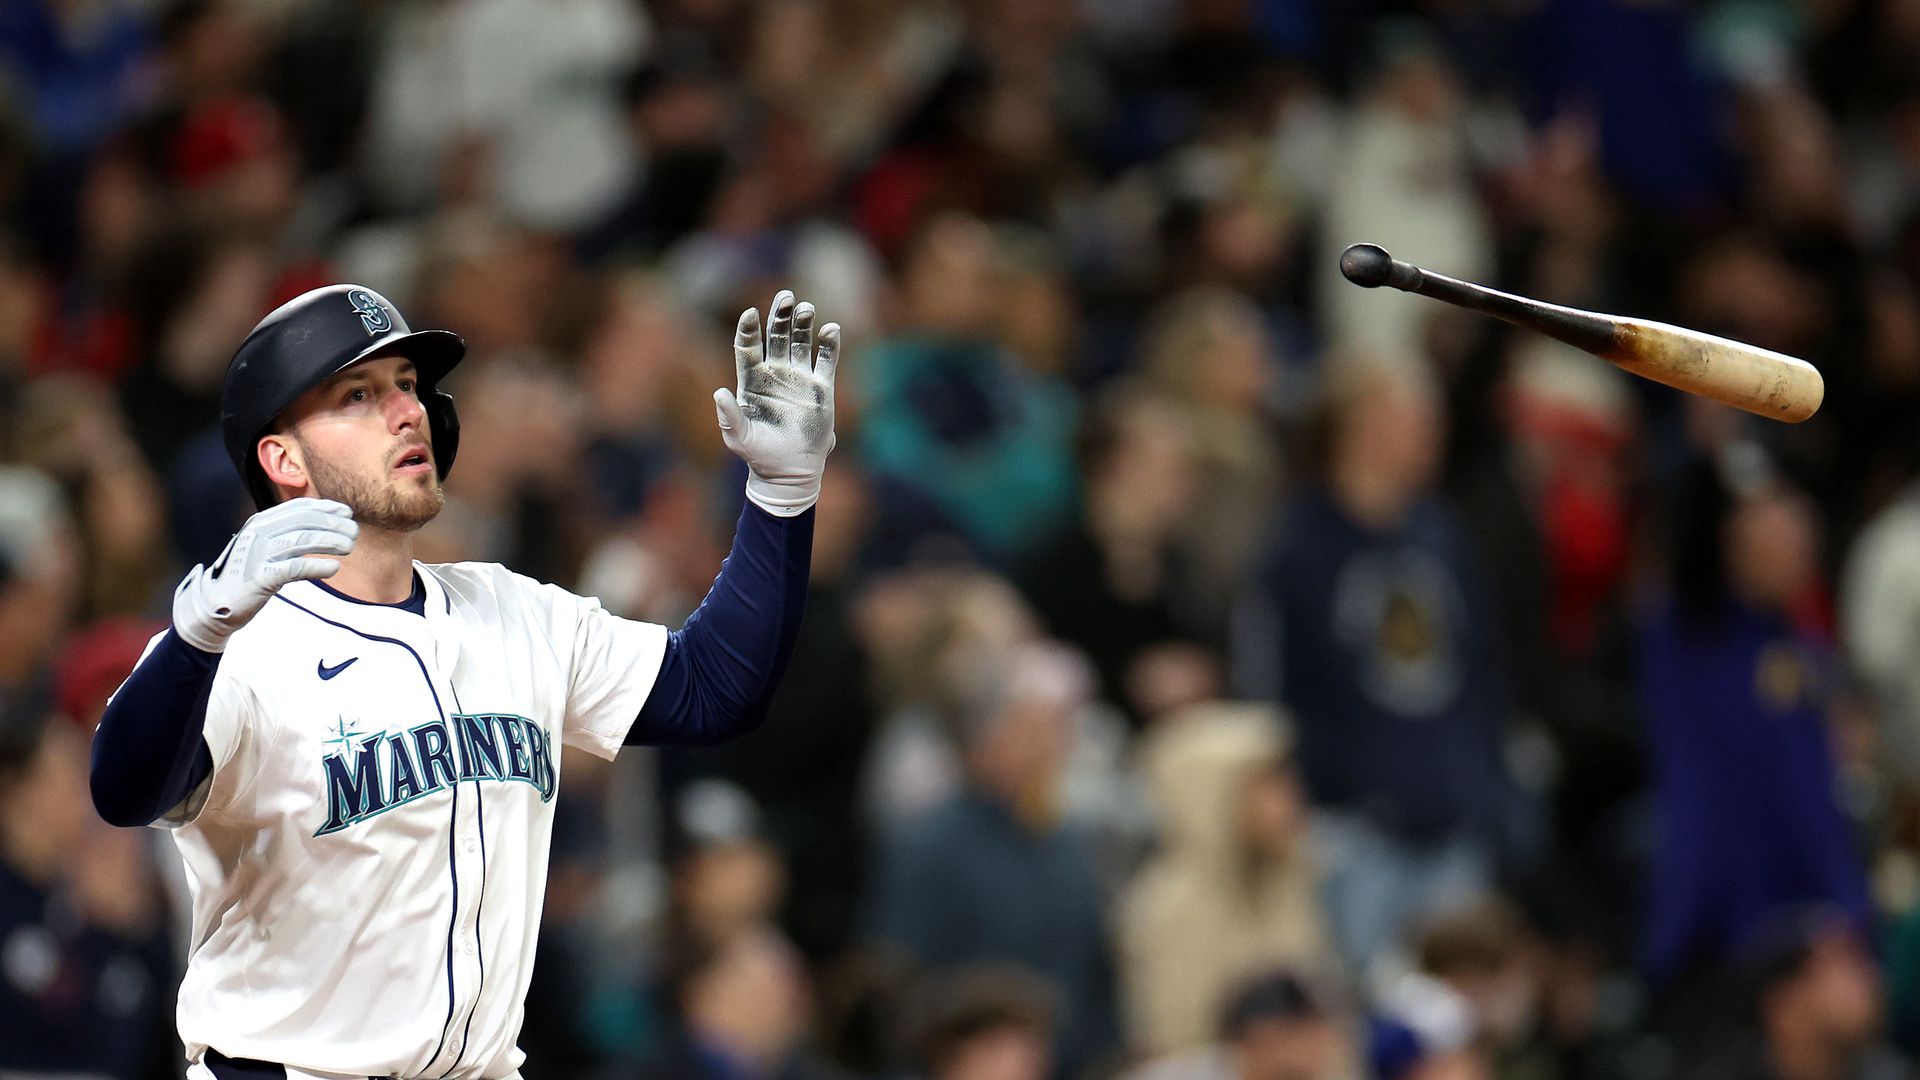 mariners win battle of dueling no-hitters over atlanta, 2-1